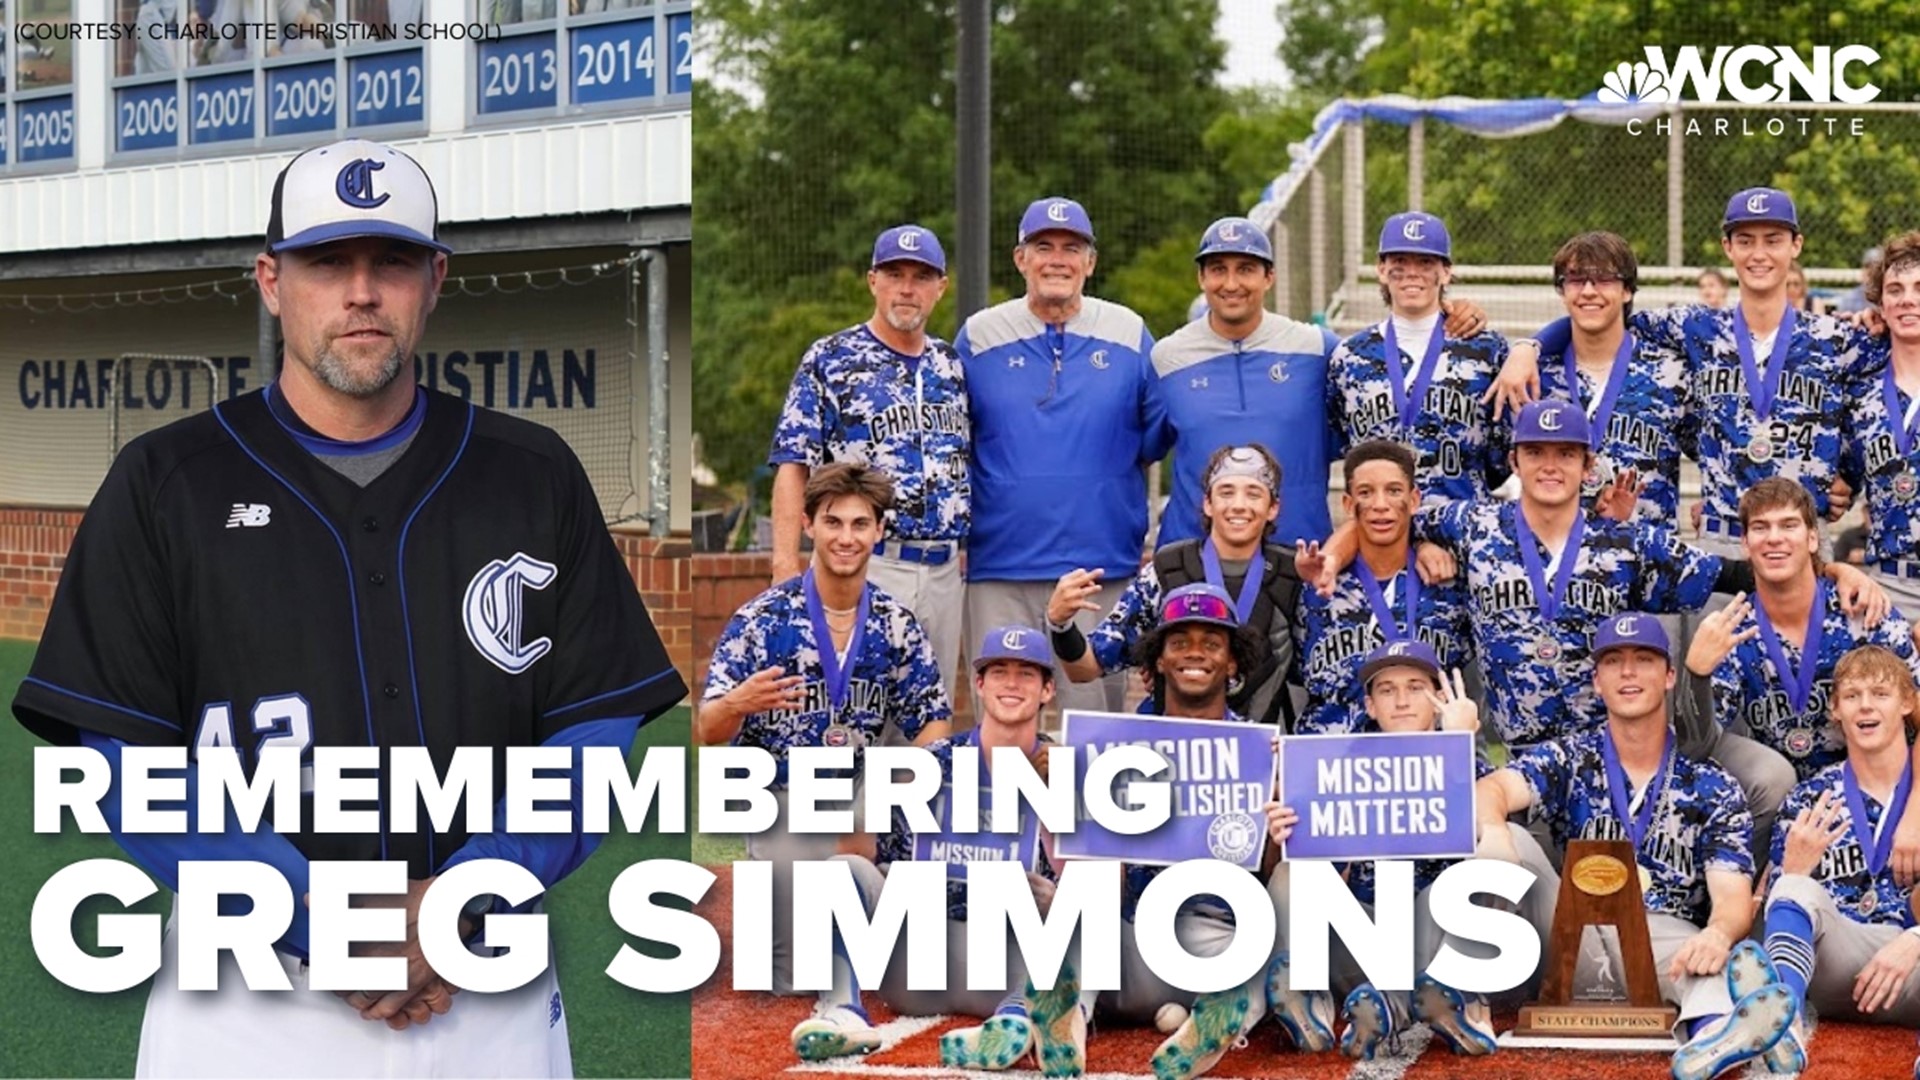 Greg Simmons' three-decade career included more than 700 wins.